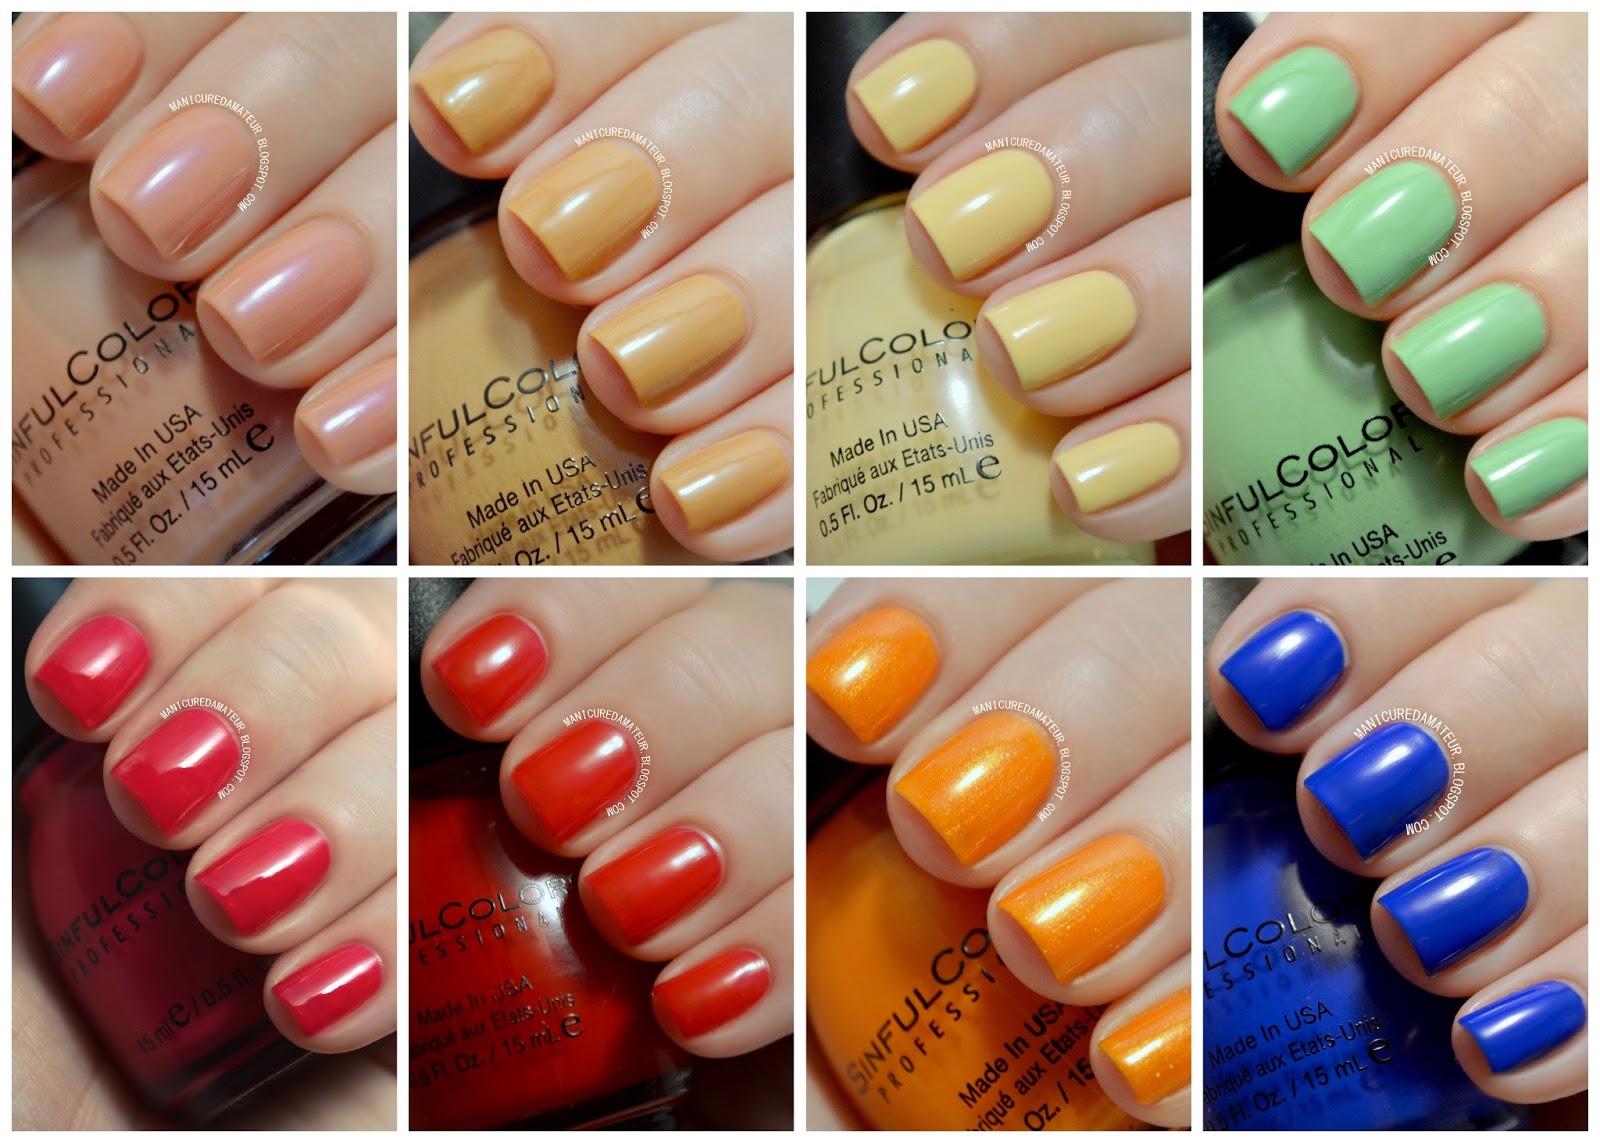 9. Sinful Colors Professional Nail Polish in "Dream On" - wide 3